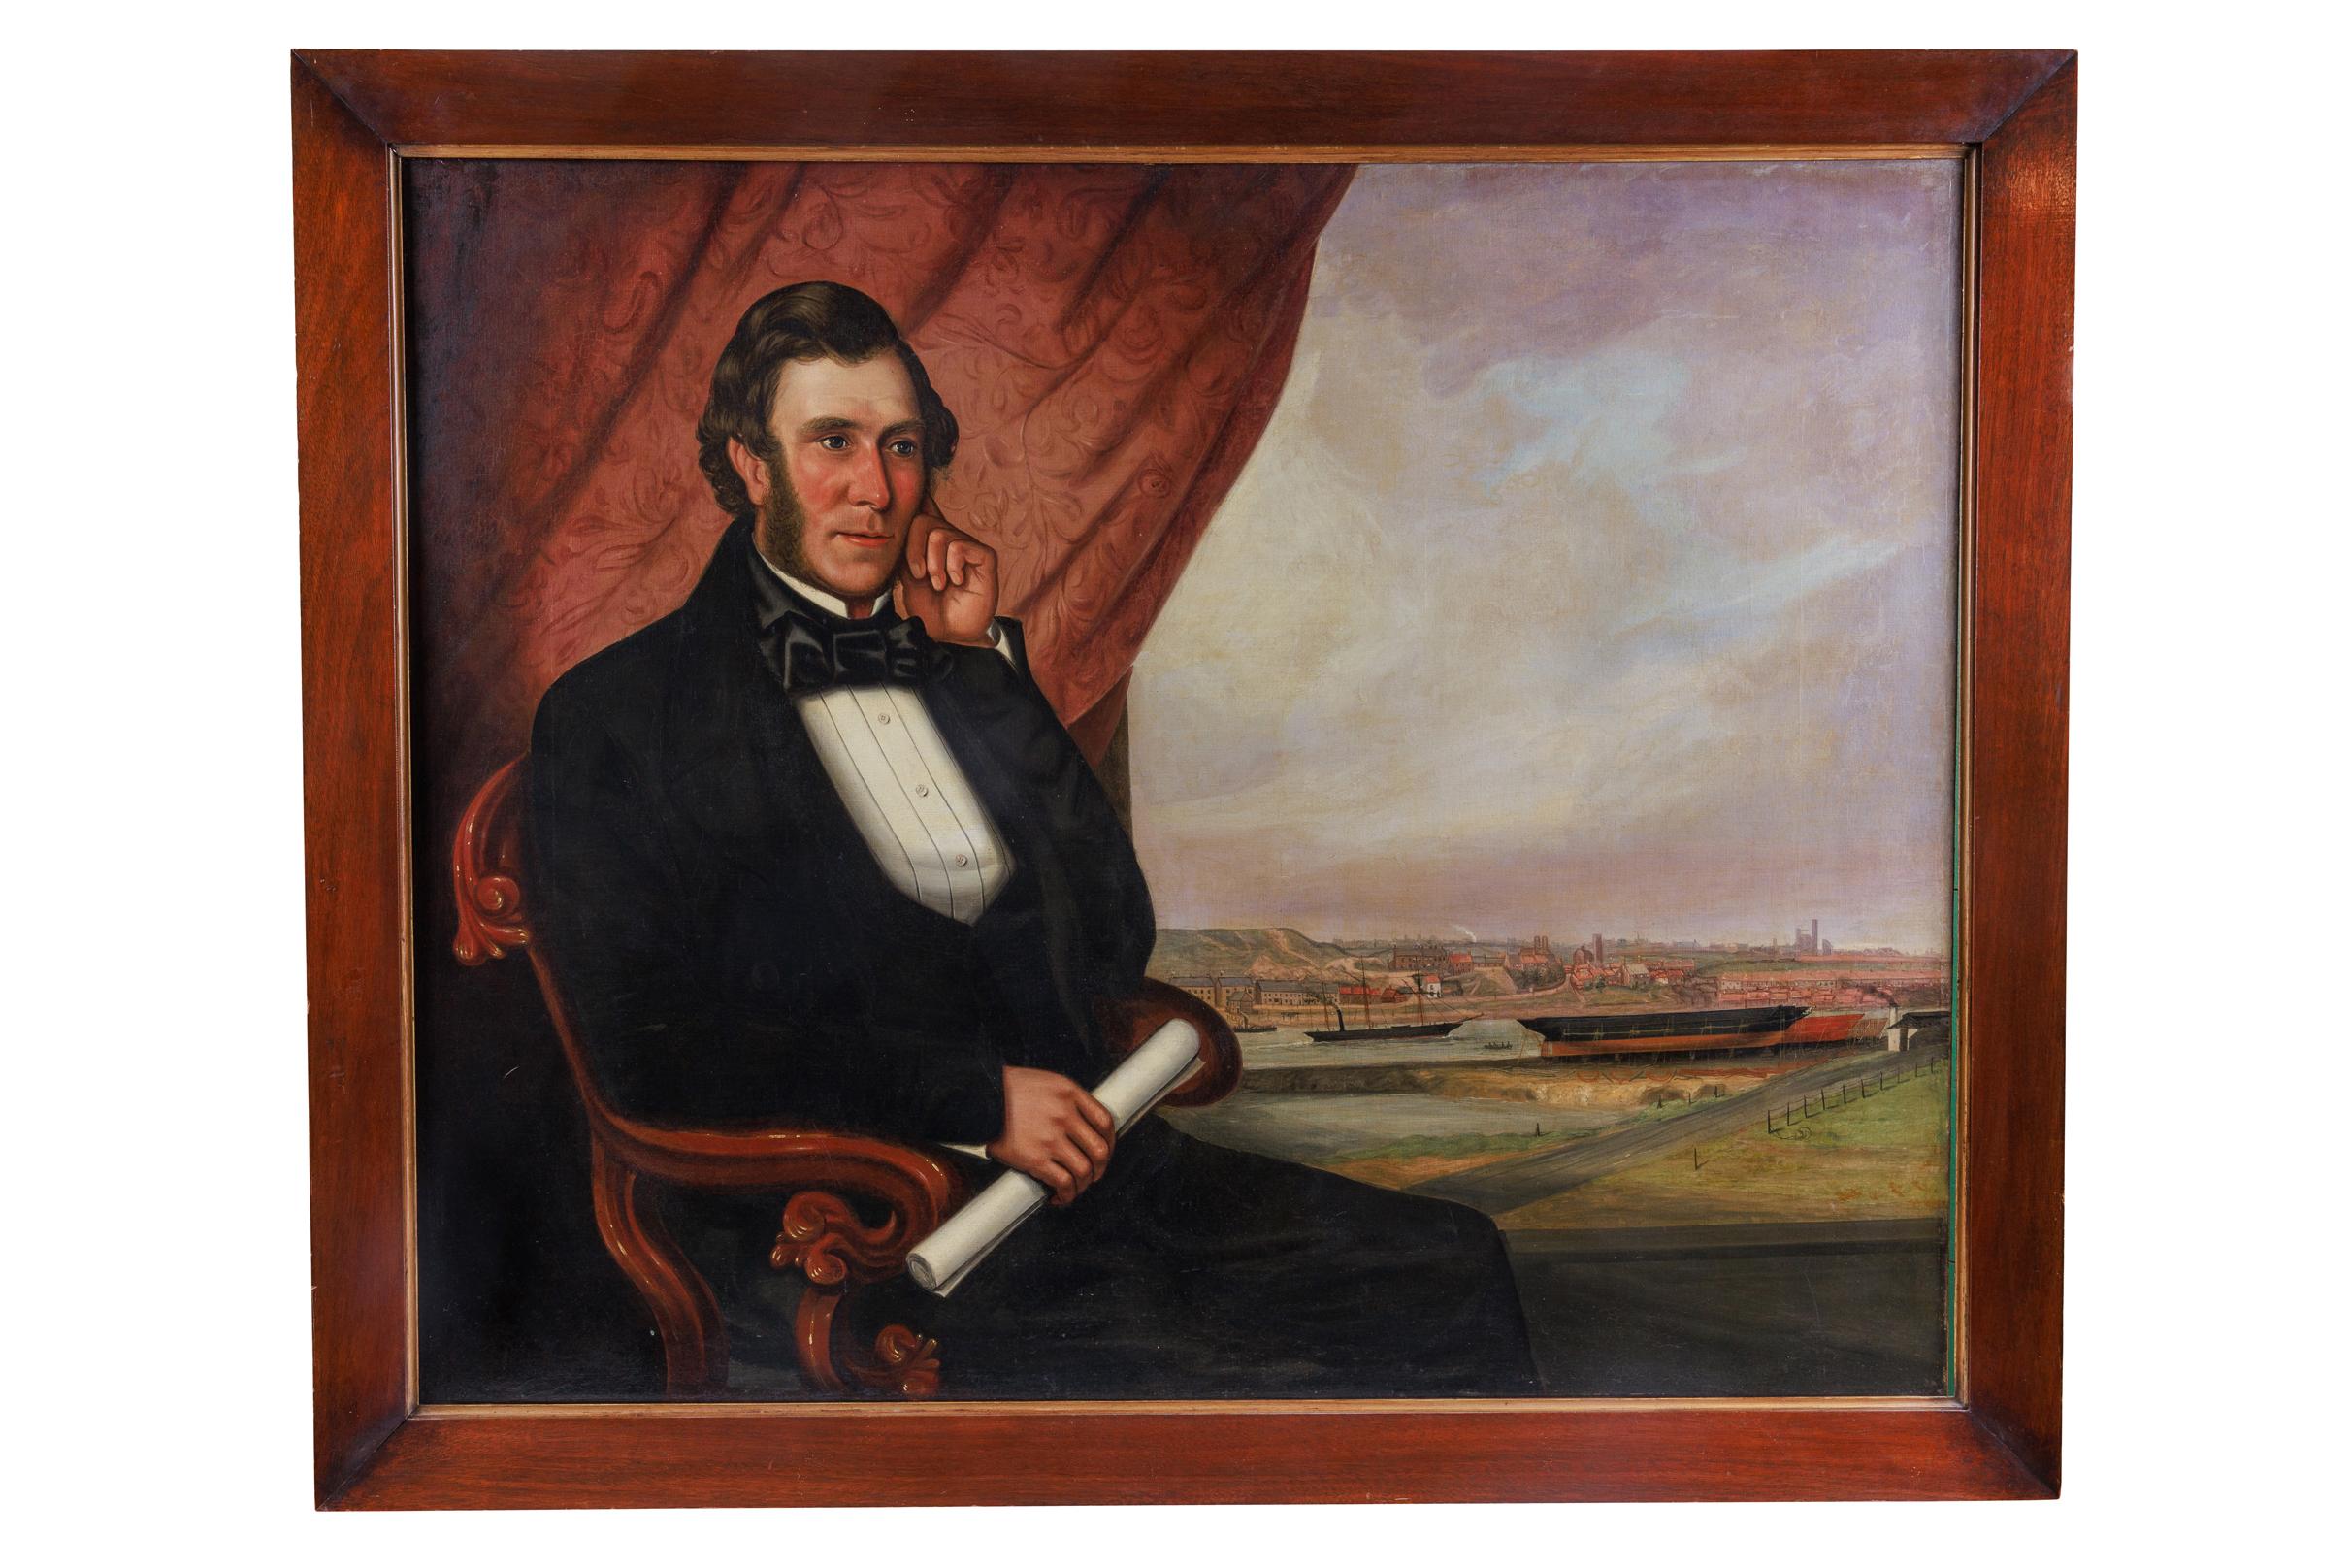 Unknown Portrait Painting - English School, A Rare Portrait of John Scott Russell and "The Great Eastern"